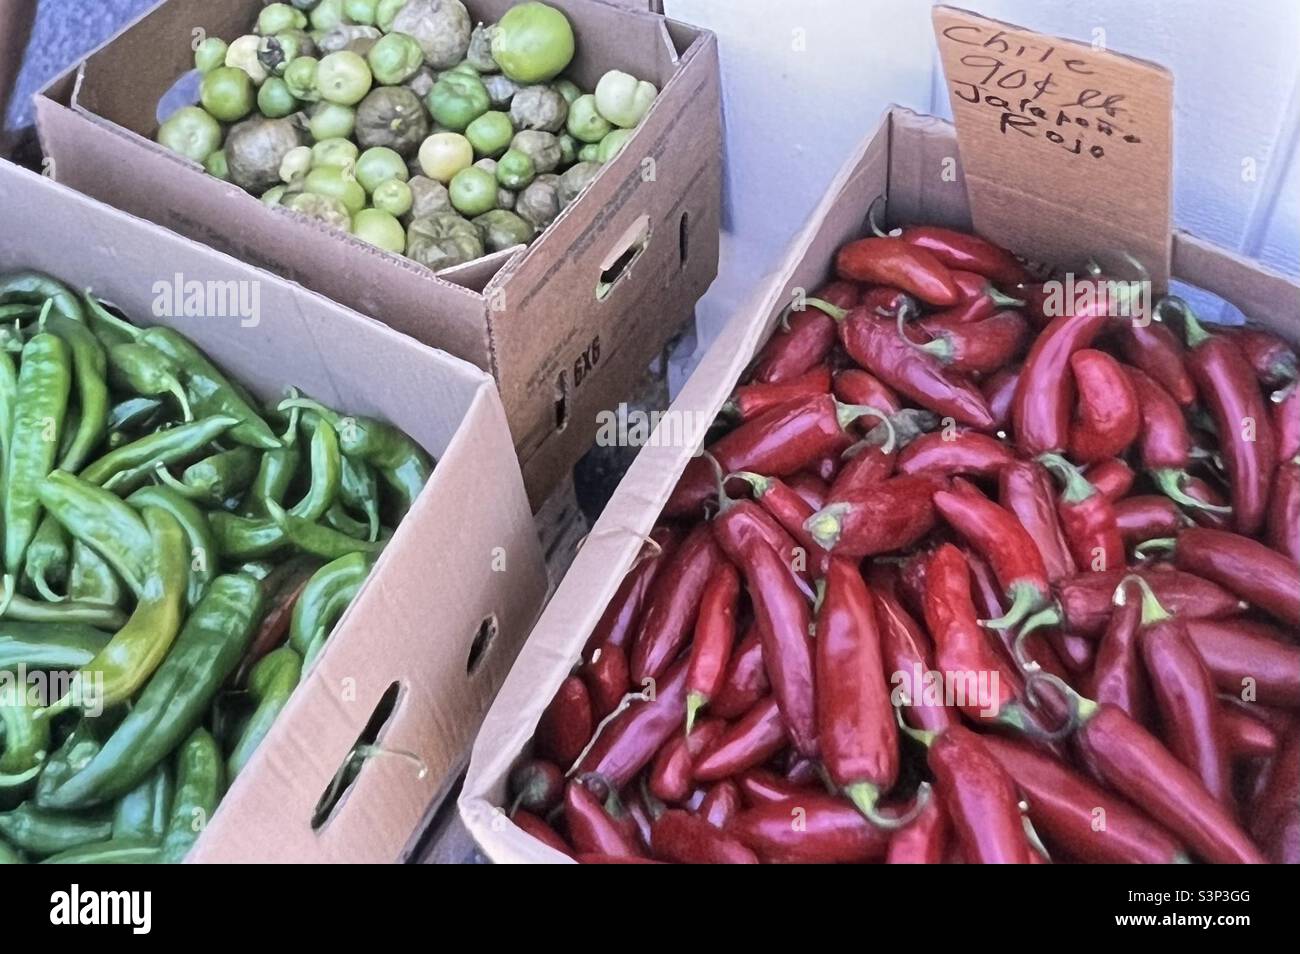 Boxes of Chilies for sale Stock Photo